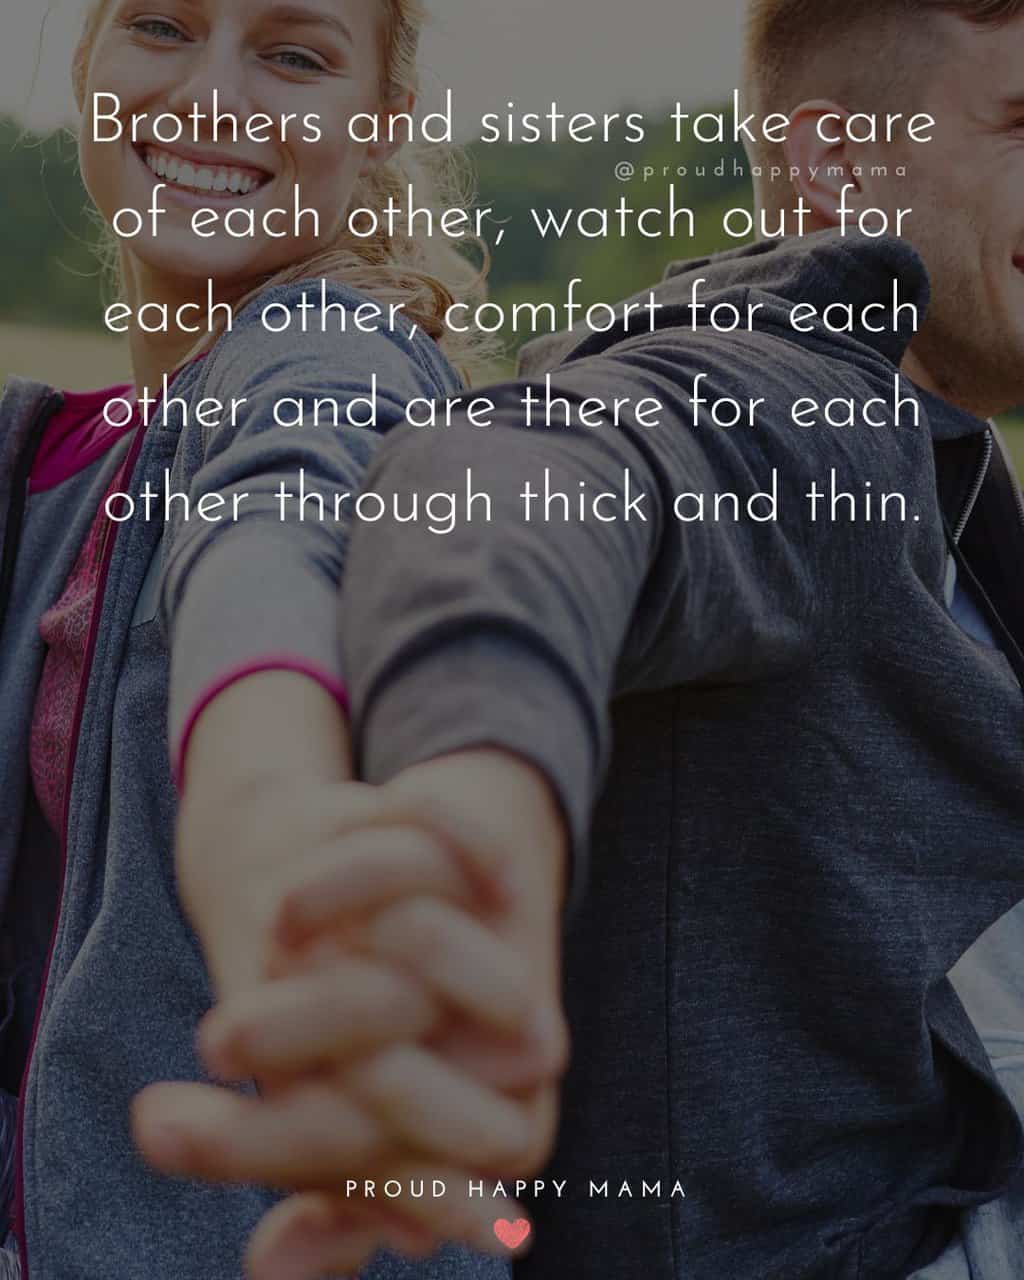 brother and sister holding hands with the quote brothers and sisters take care of each other watch out for each other comfort for each other and are there for each other through thick and thin